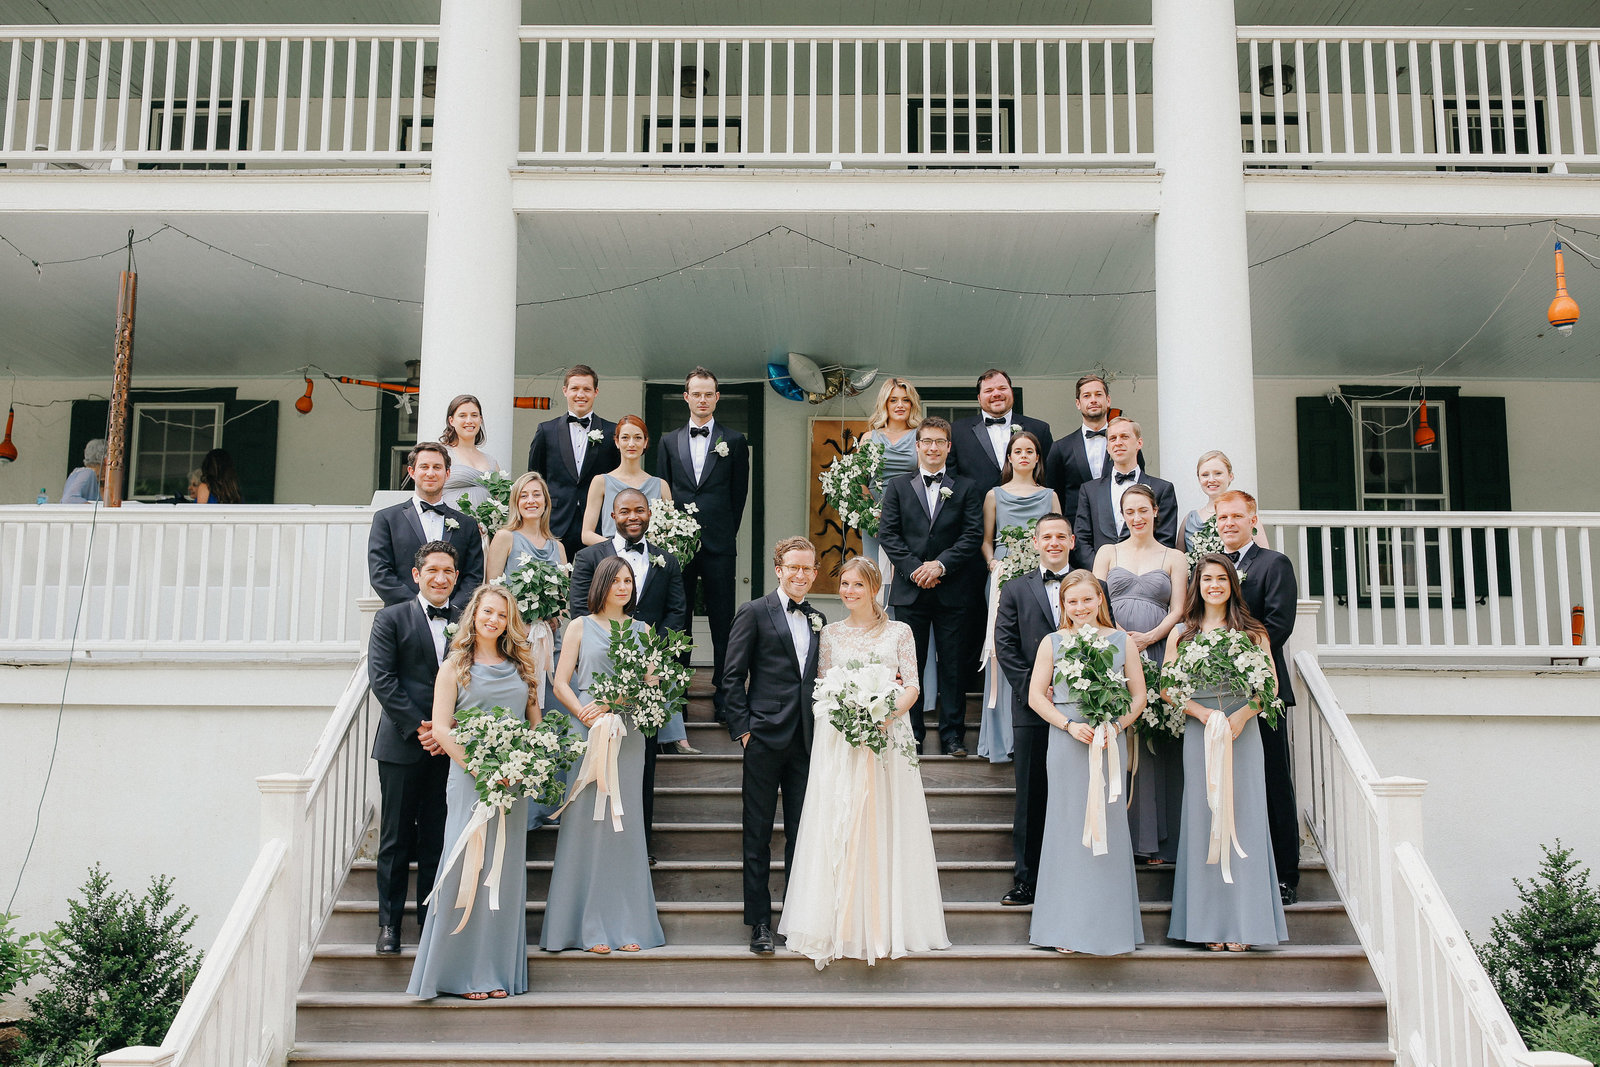 Whole bridal party pose together for a shot on the steps of the family's farm house estate.